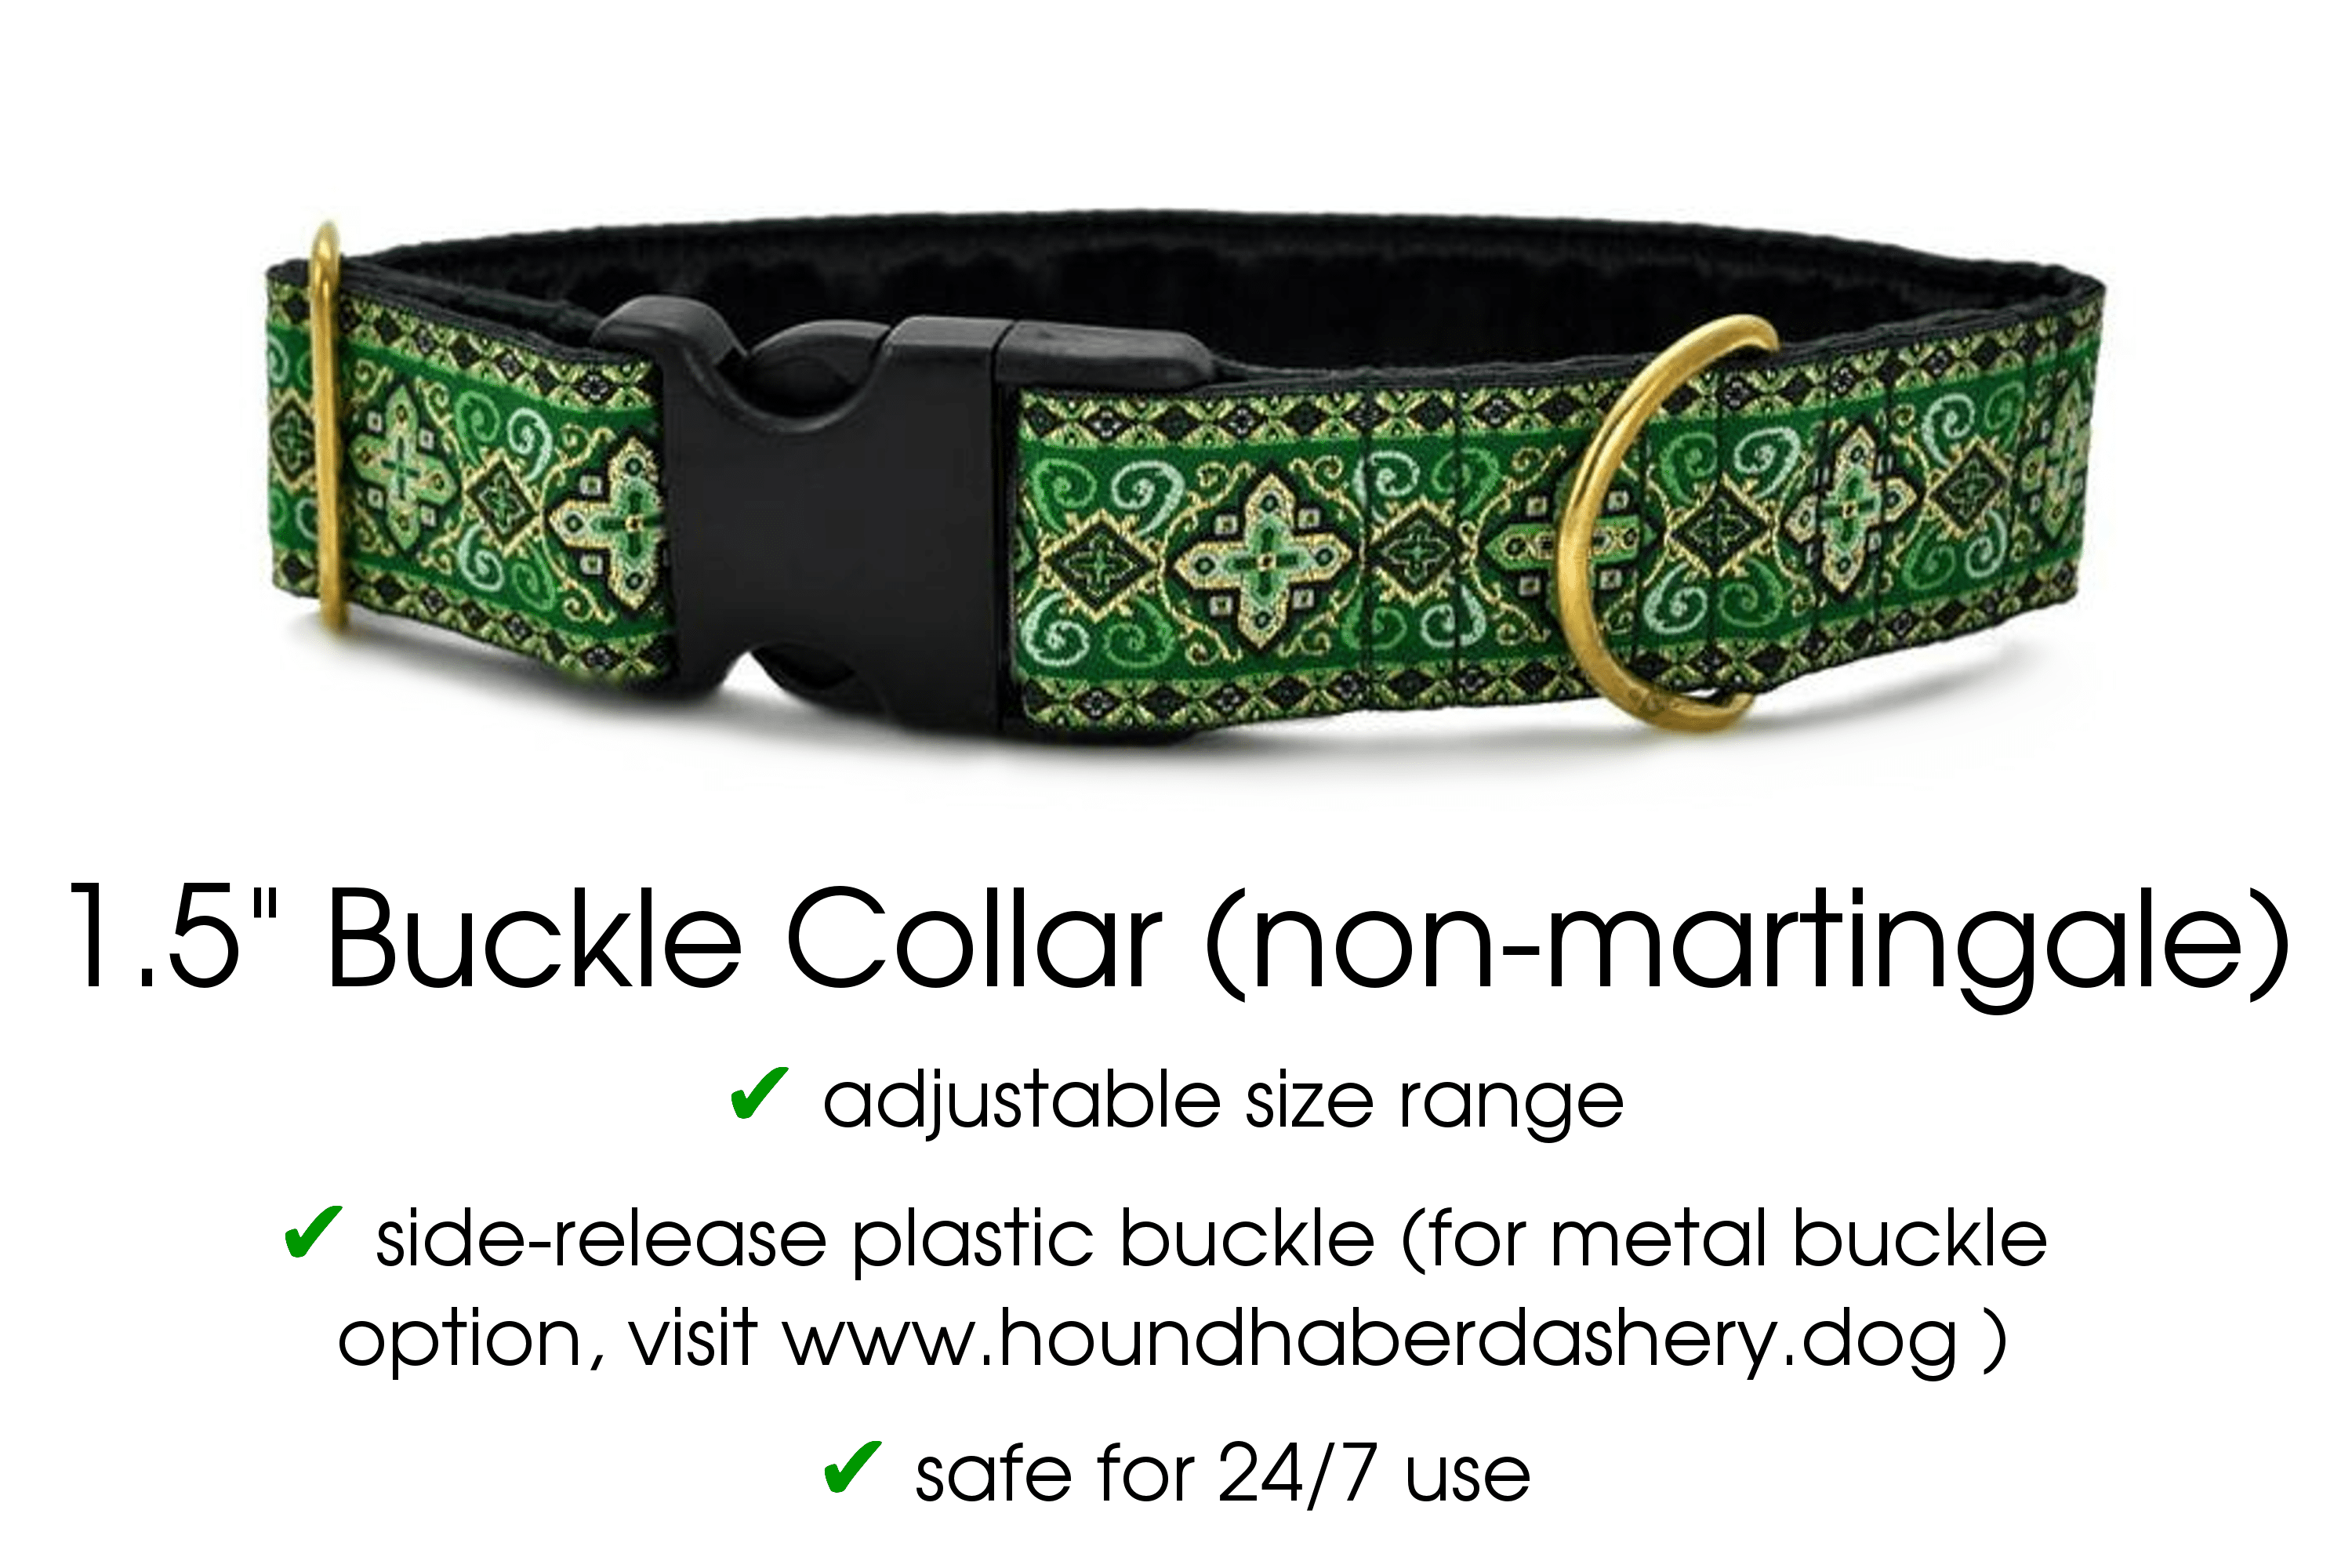 The Hound Haberdashery Green Nobility Buckle collar (size LARGE)- for Medium to Large Dog, Greyhound, Whippet, Poodle - 1.5 Inch Wide